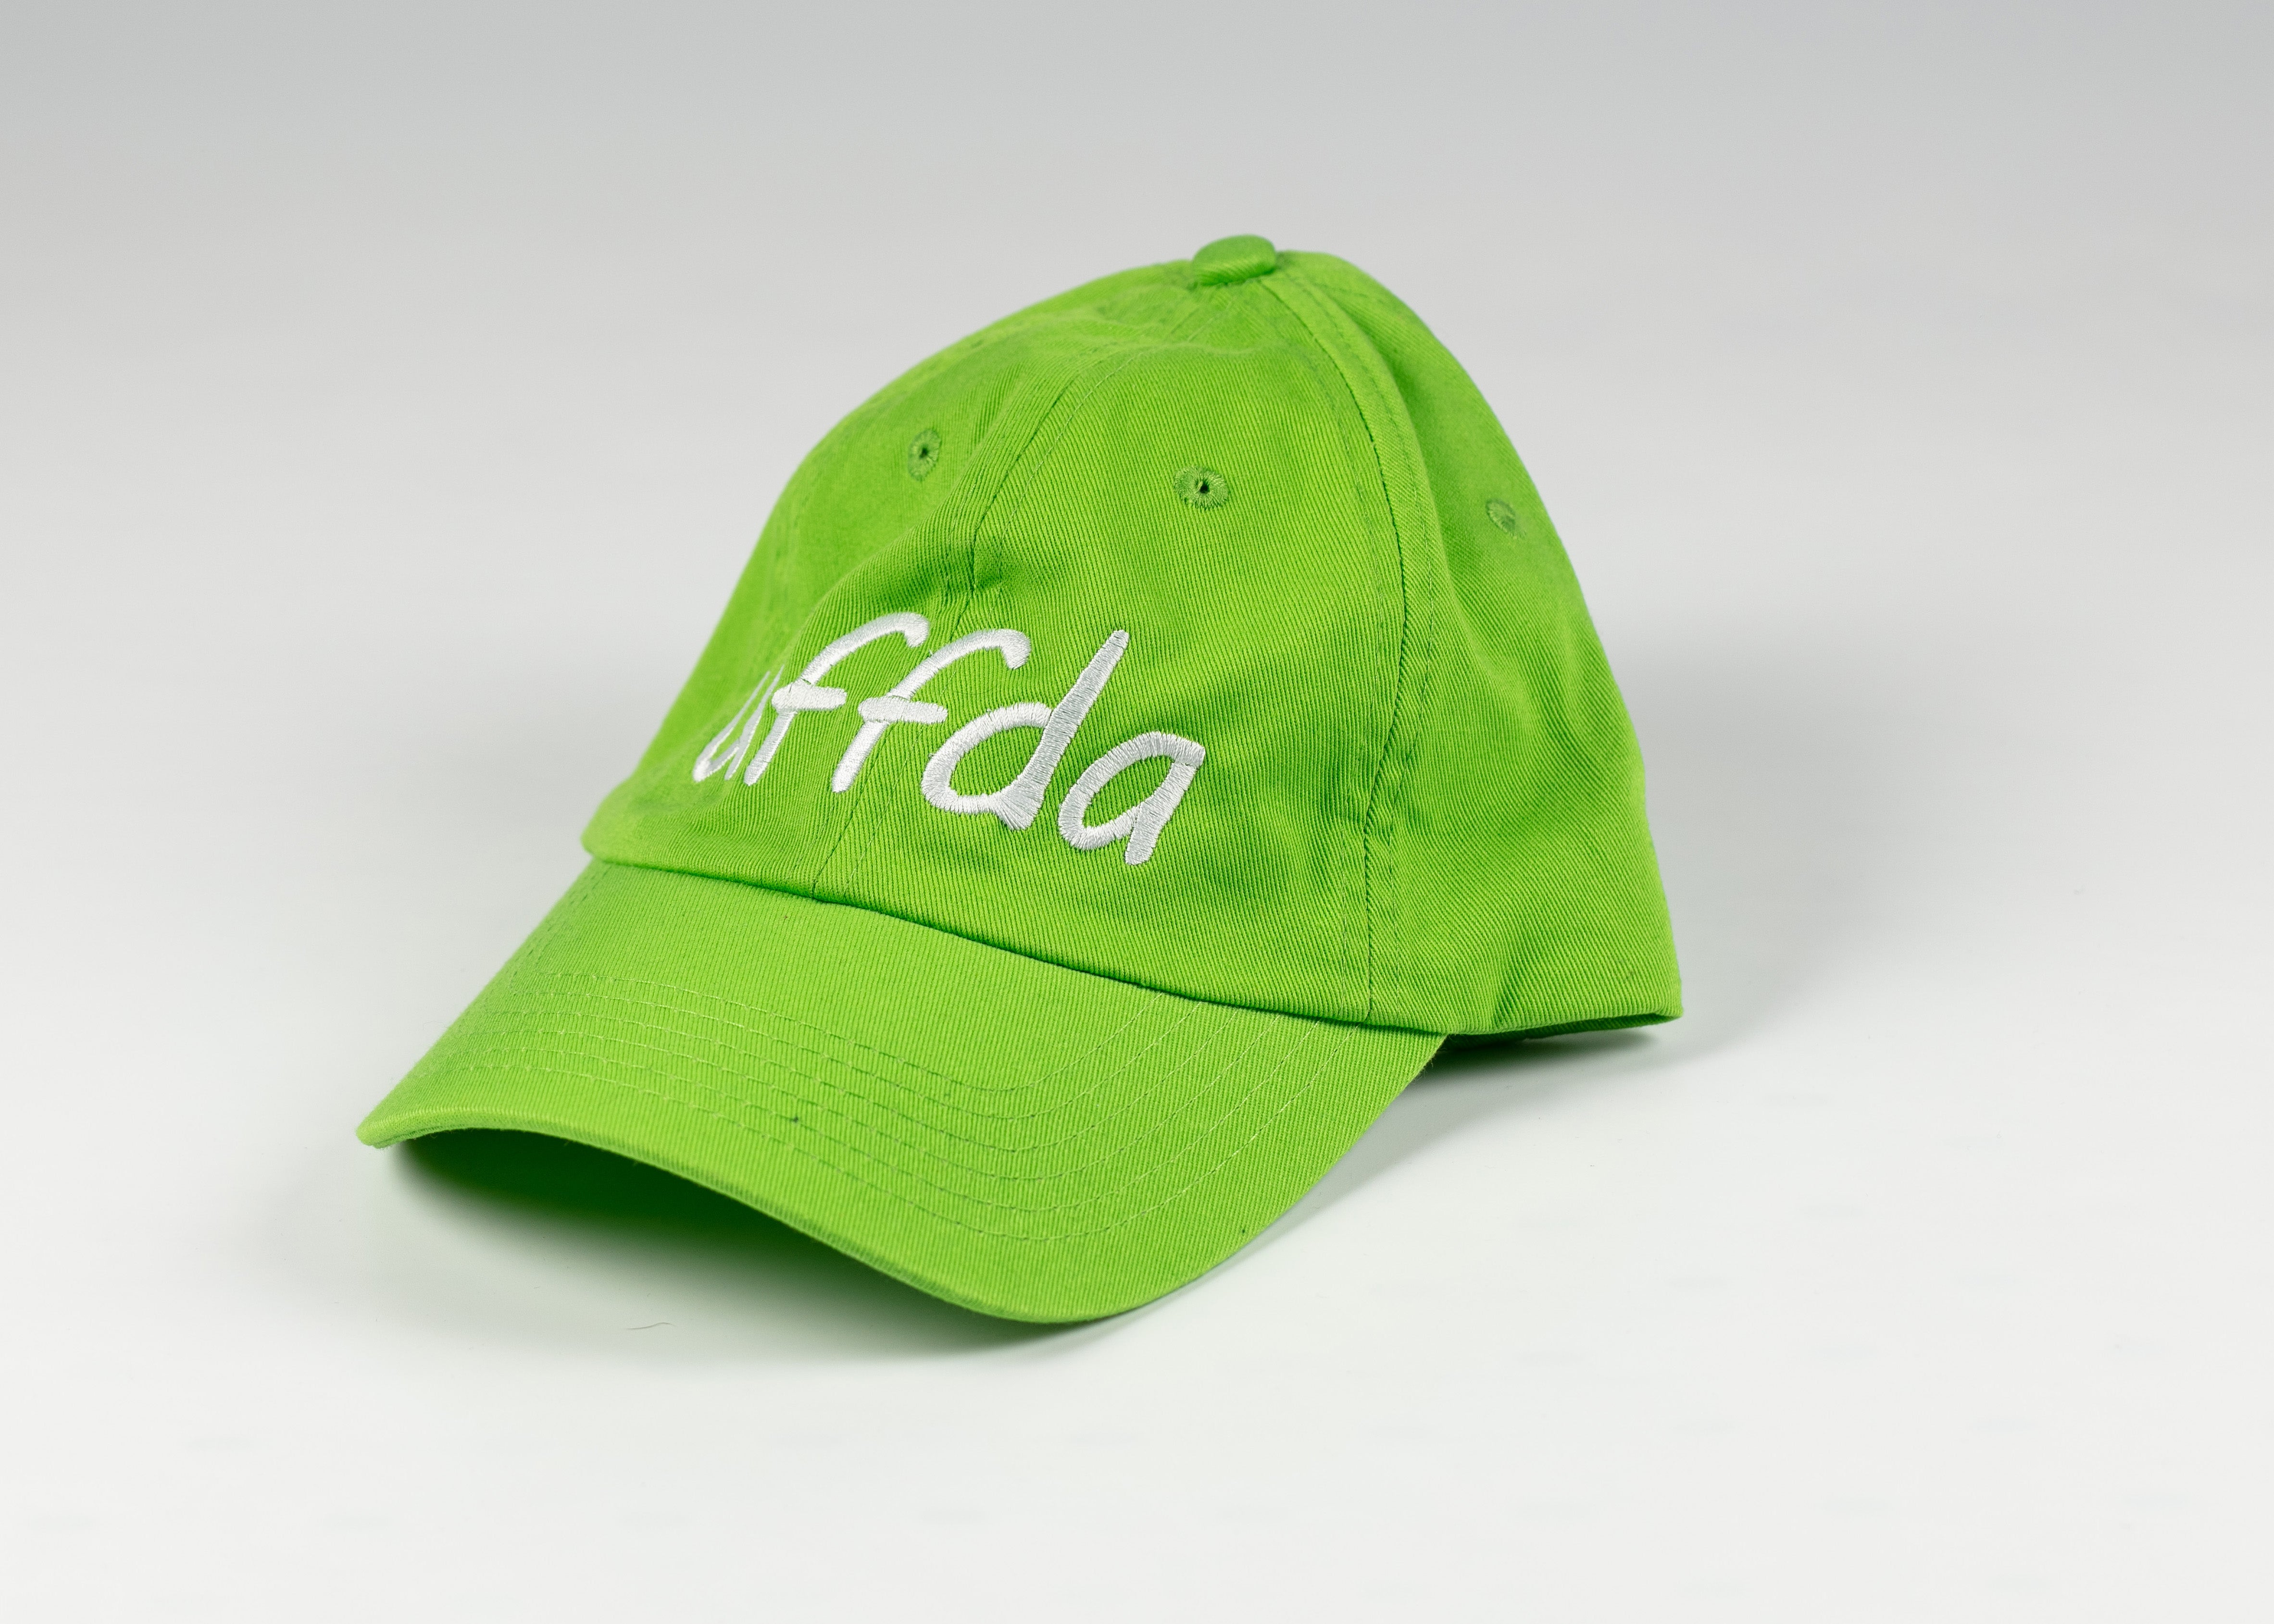 UFFDA EMBROIDERED CAP WITH ADJUSTABLE STRAP